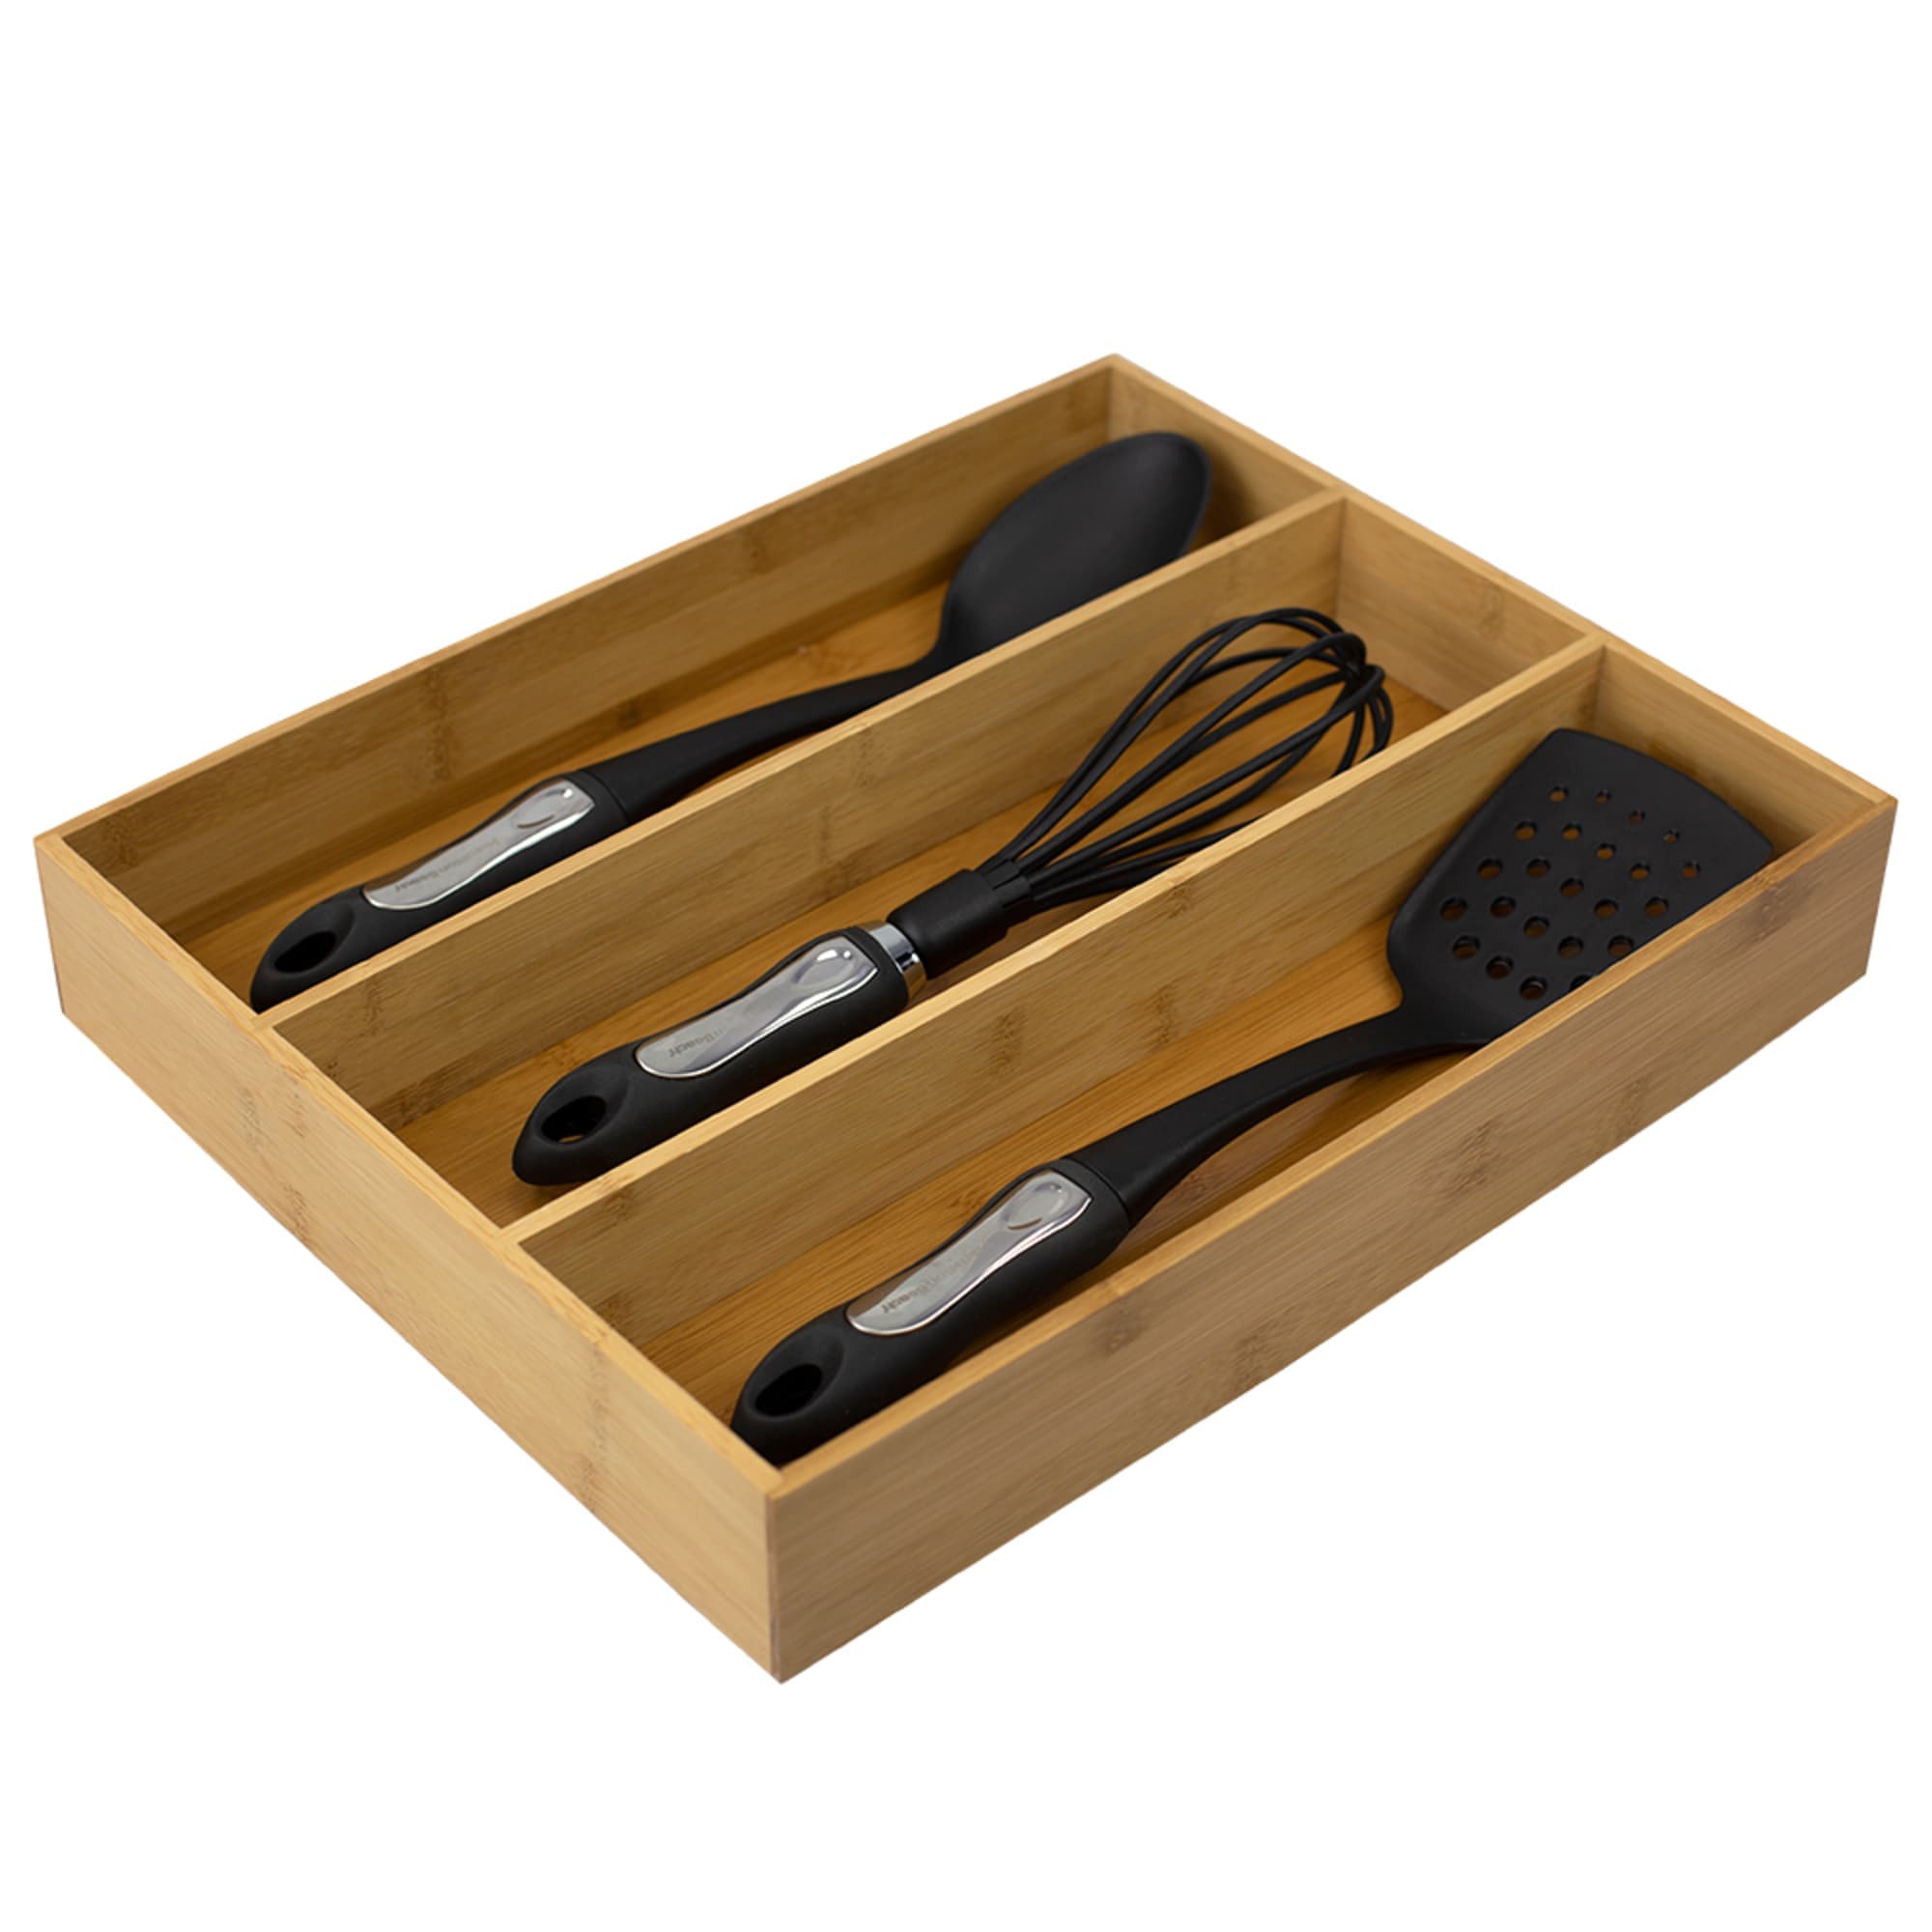 Home Basics Three Compartment Bamboo Organization, Natural $10 EACH, CASE PACK OF 6